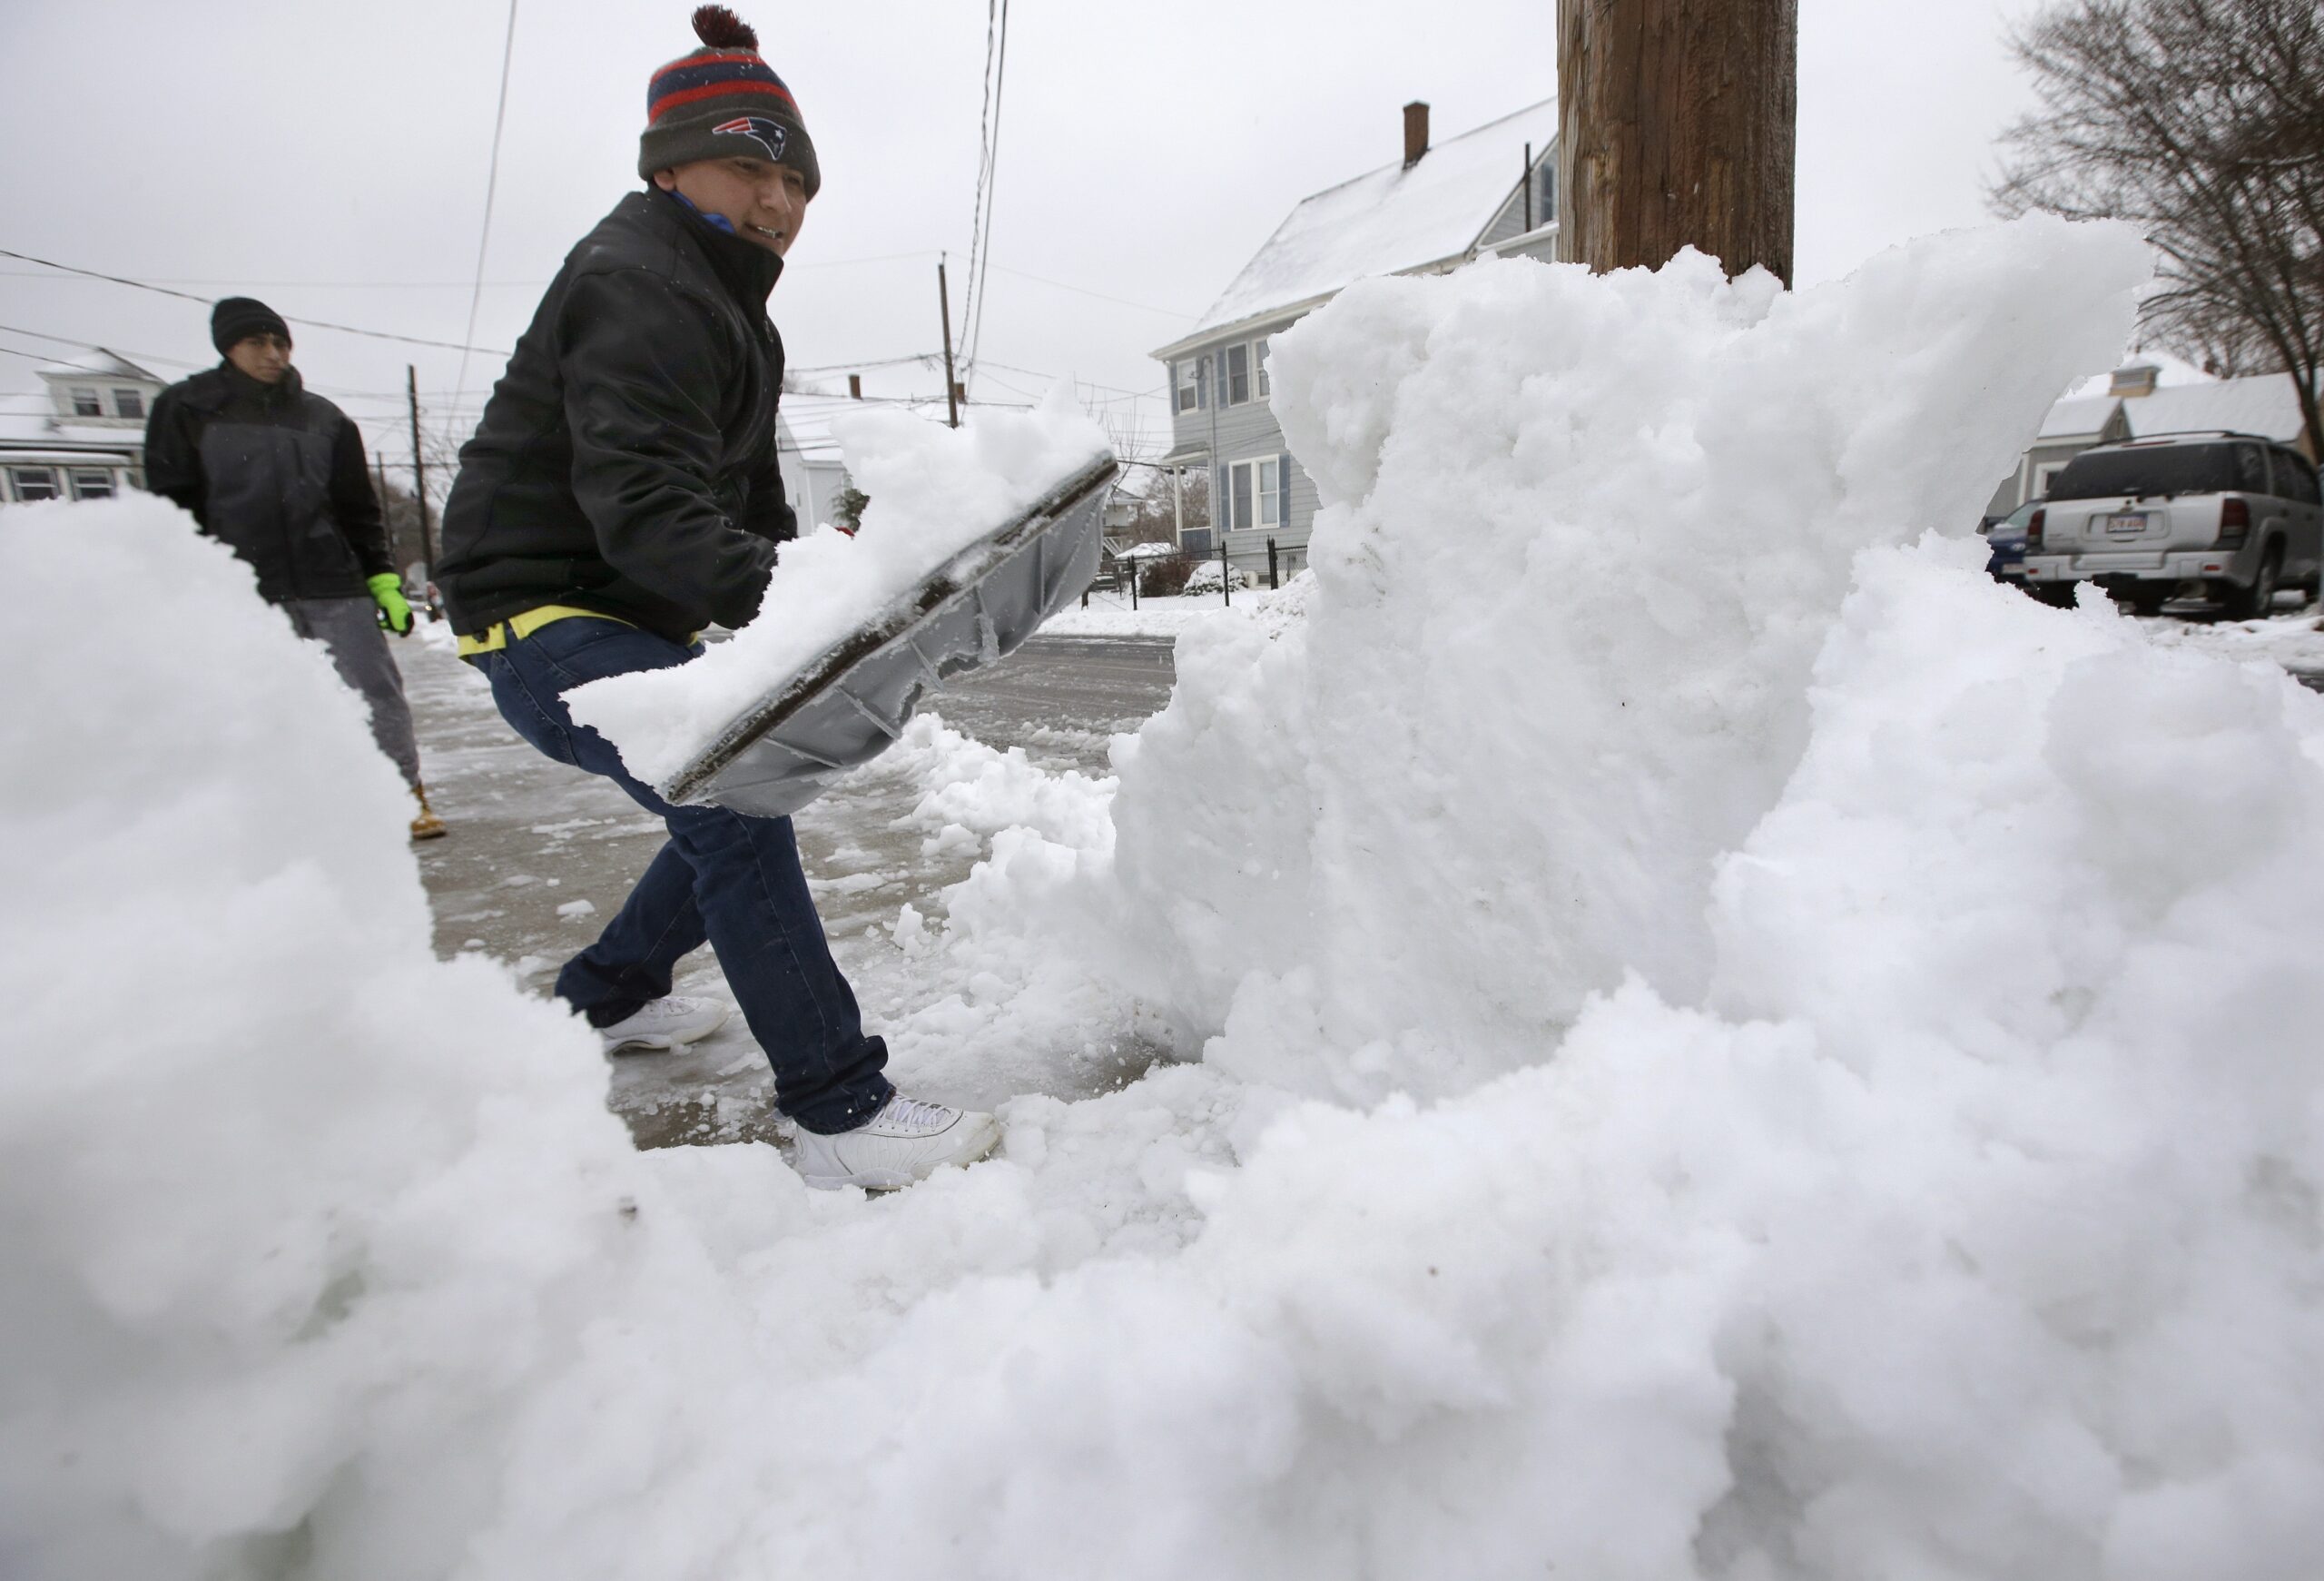 Miguel Delao shovels snow in front of his home this winter